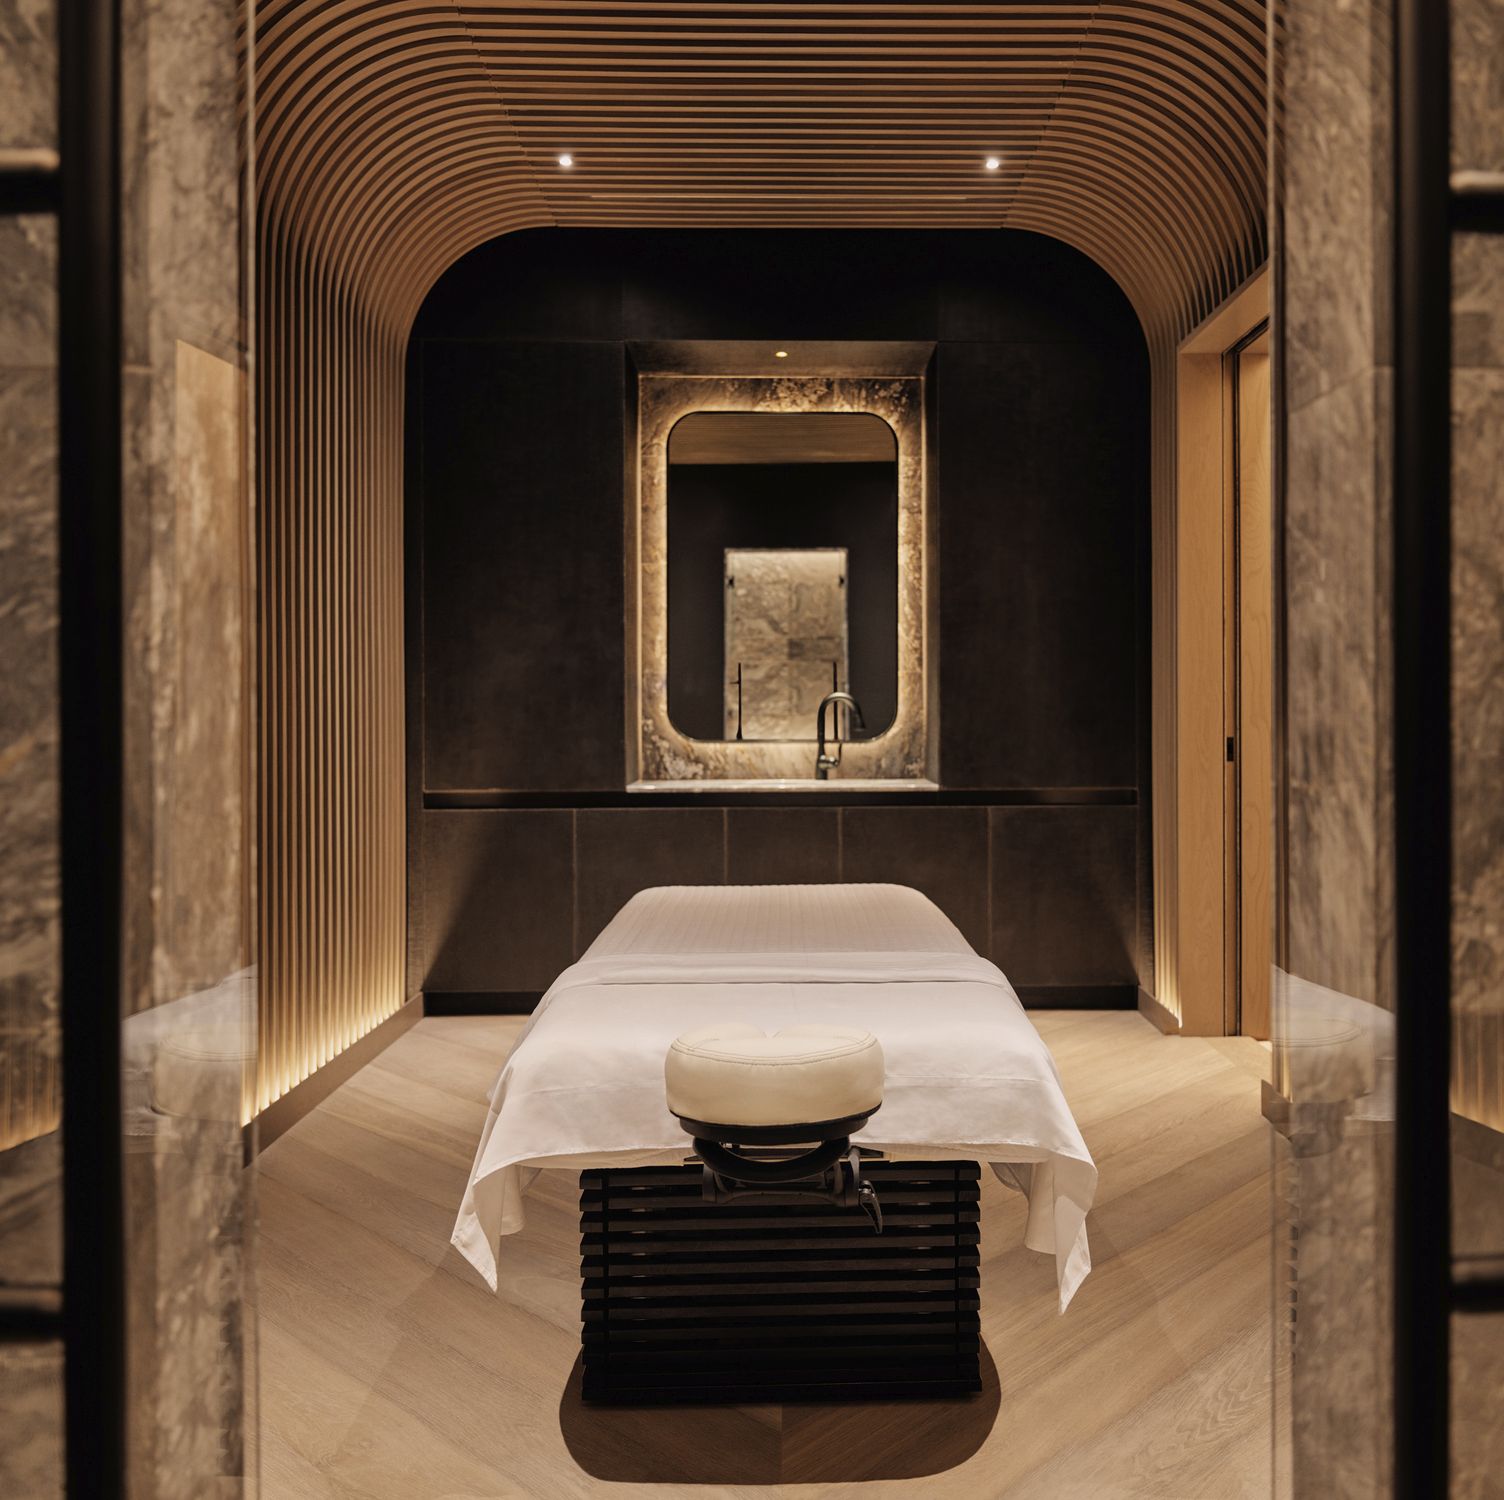 The luxury NYC hotel teams up with Valentino and Dr. Lara Devgan for the ultimate experience.